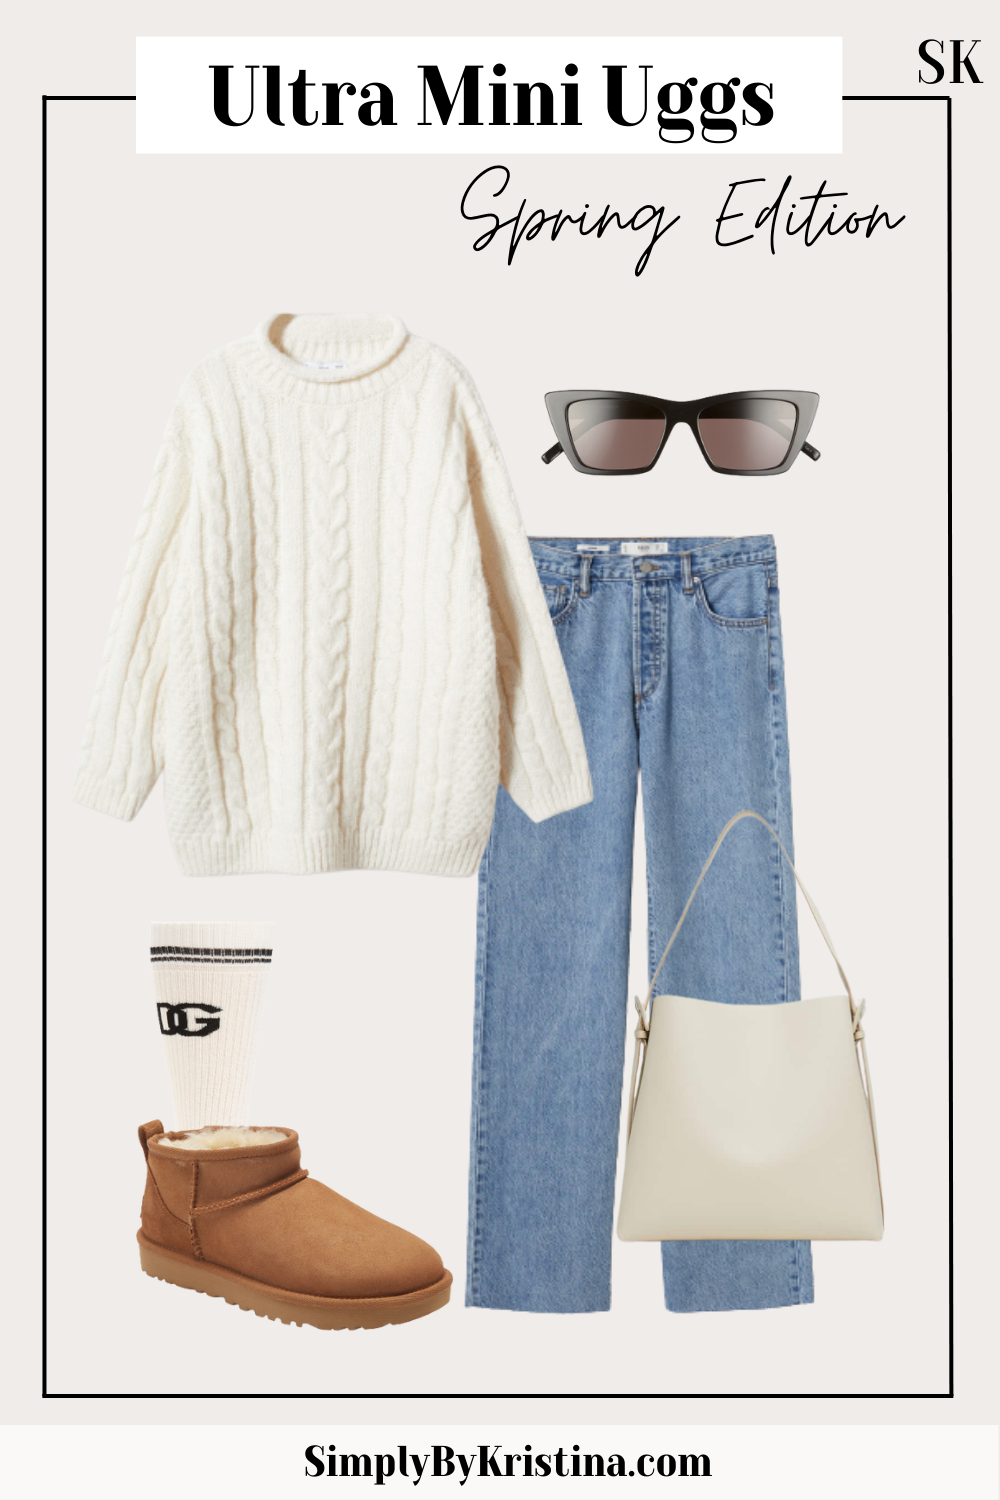 HOW TO STYLE ULTRA LOW MINI UGGS  6 autumn/winter outfit ideas